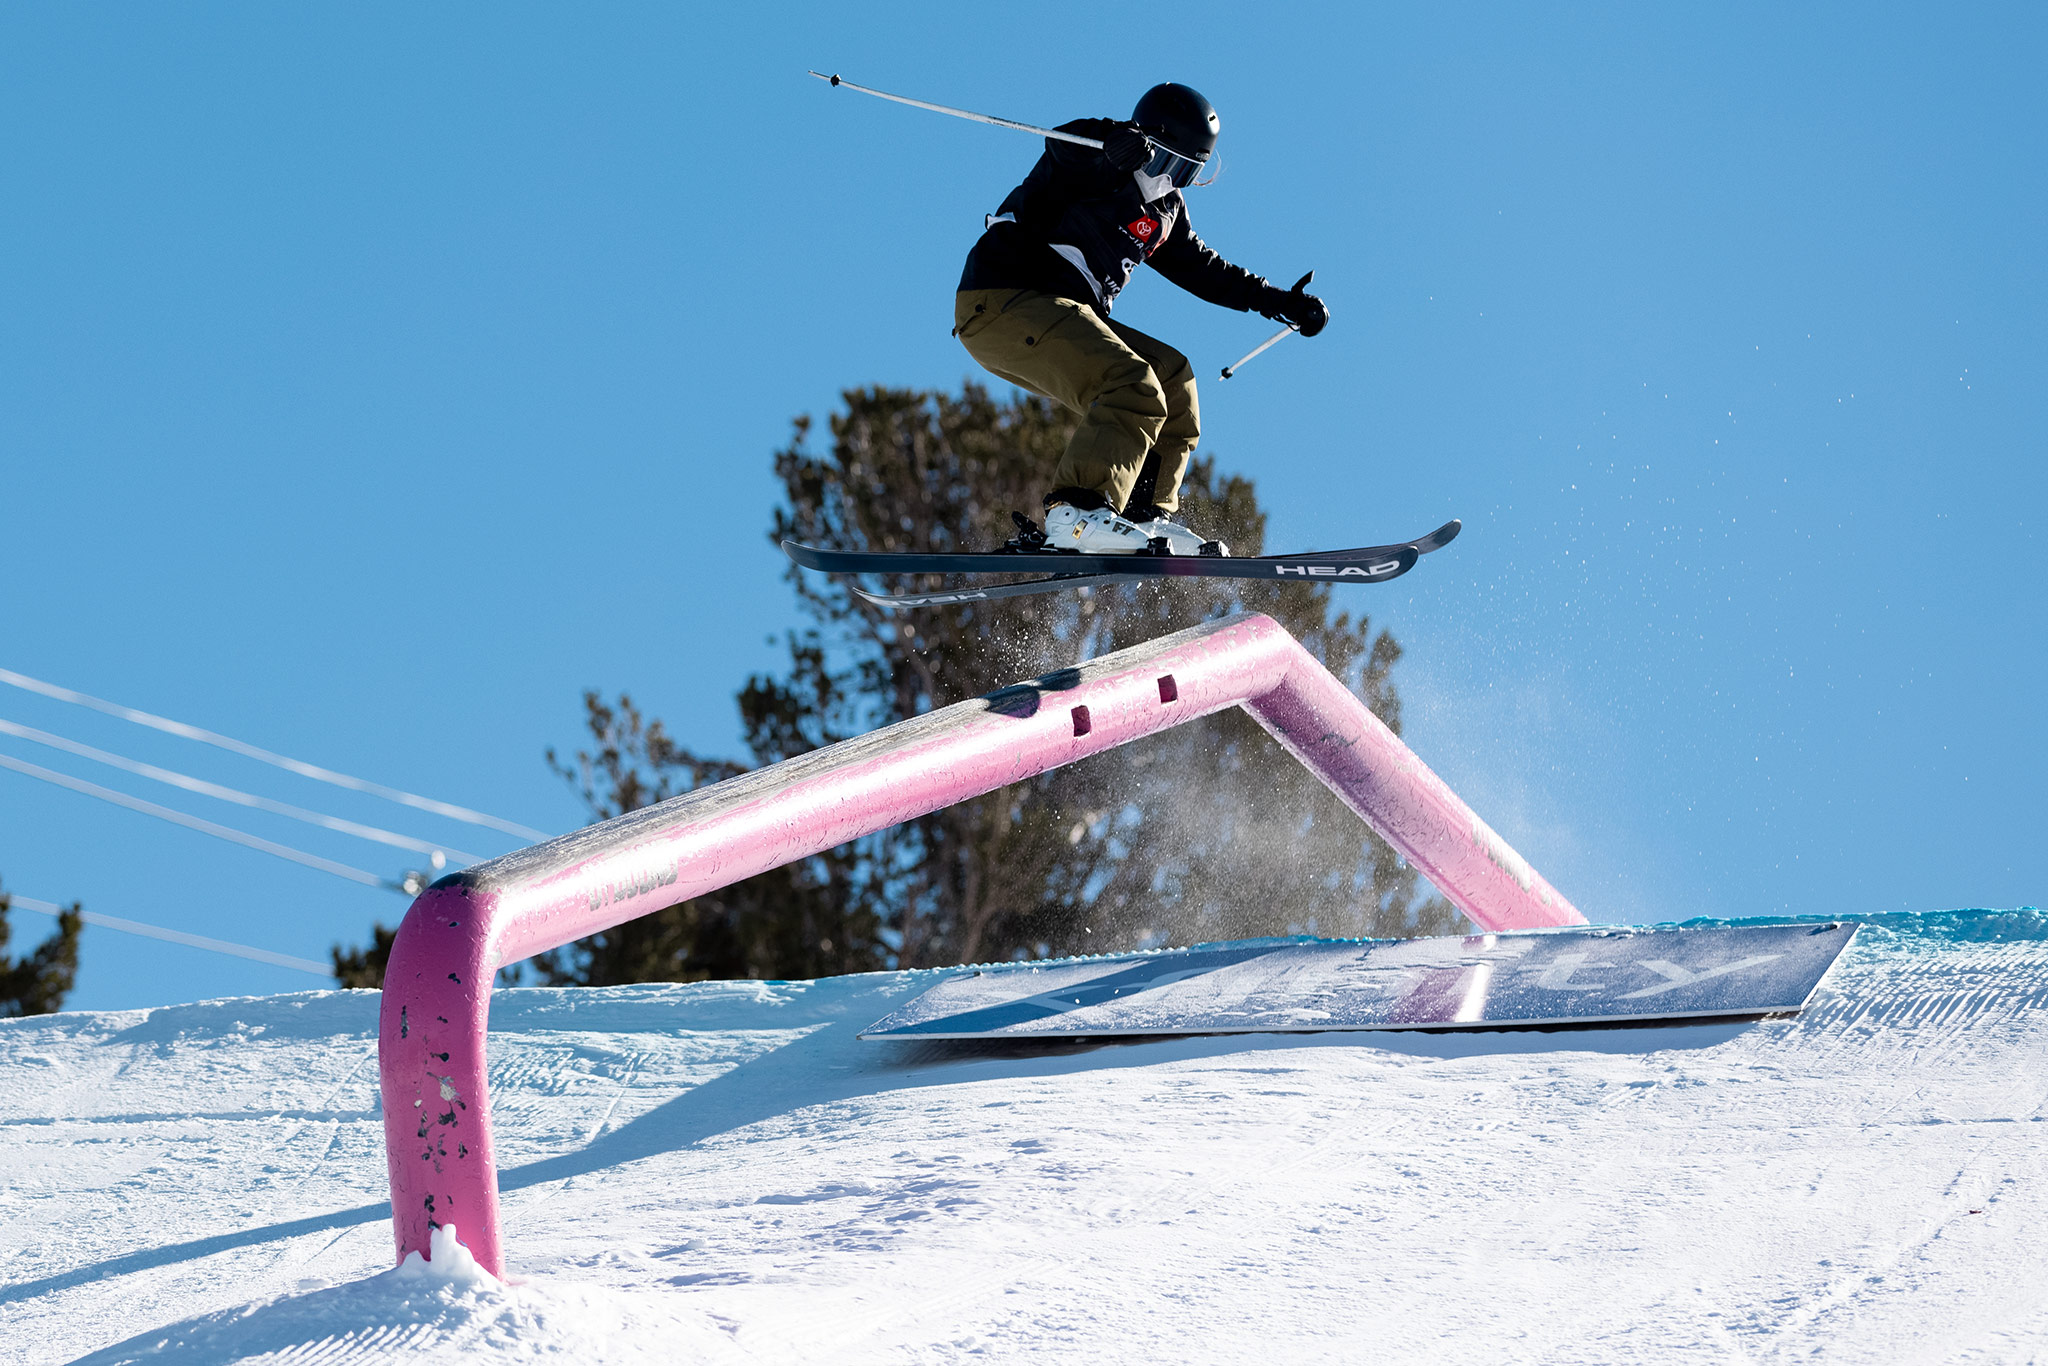 Marin Hamill at the 2022 US Grand Prix Slopestyle in Mammoth Mountain, California